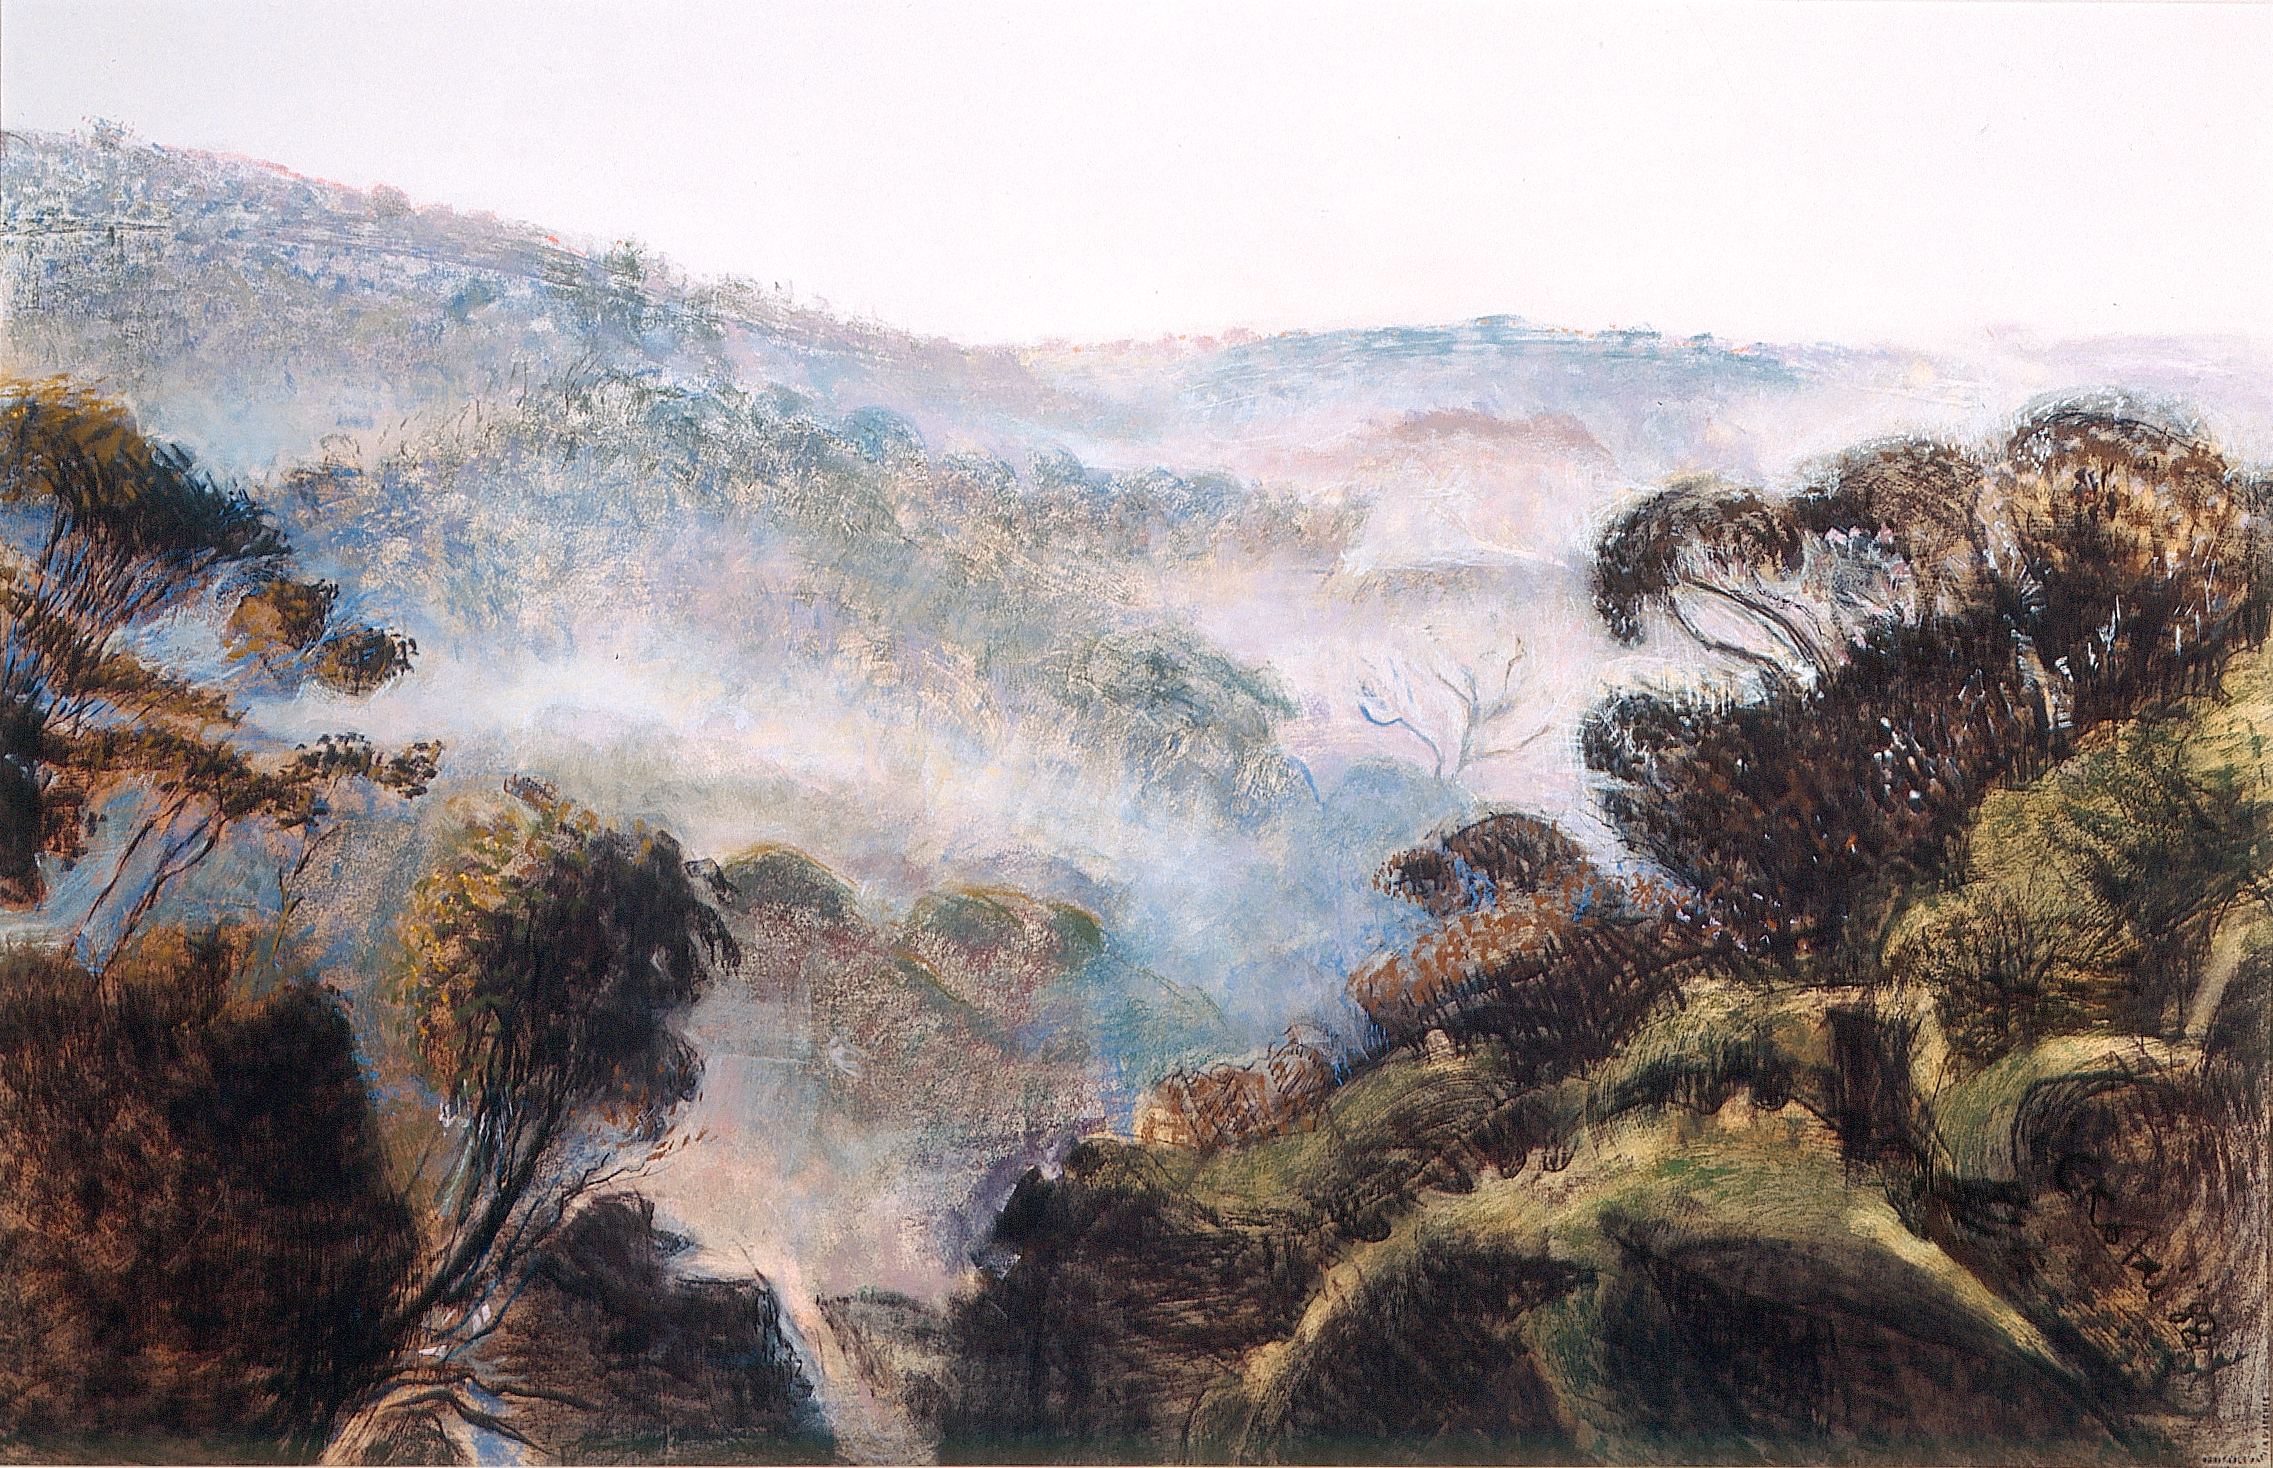 Morning Mist 1988, pastel and charcoal on Arches paper, 57 x 76cm. Private Collection